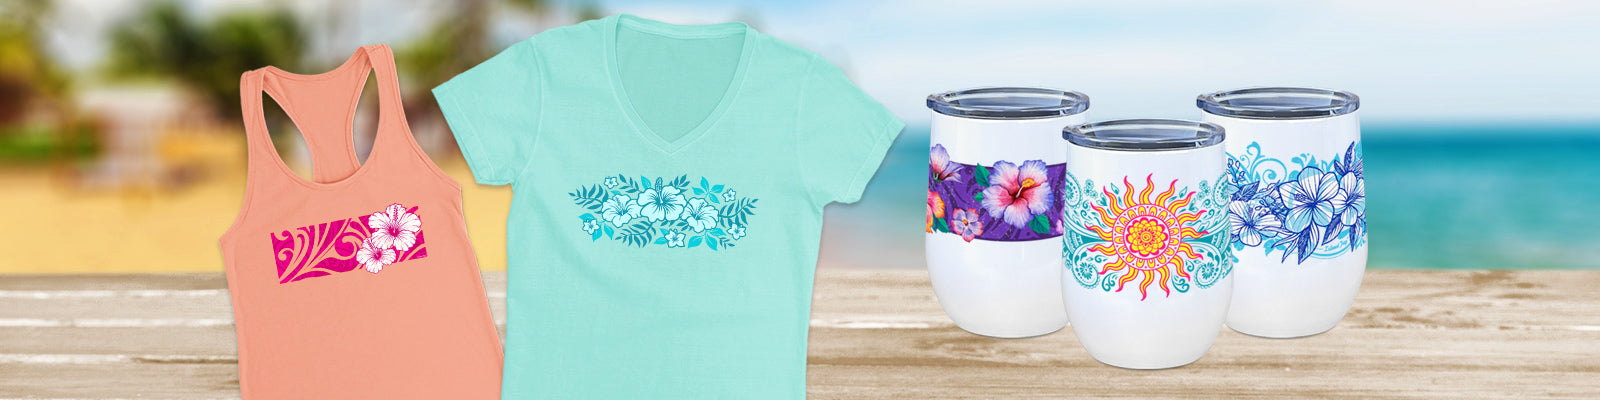 Hawaiian inspired flower designs. Printed on high quality tees, tank tops, and accessories. 